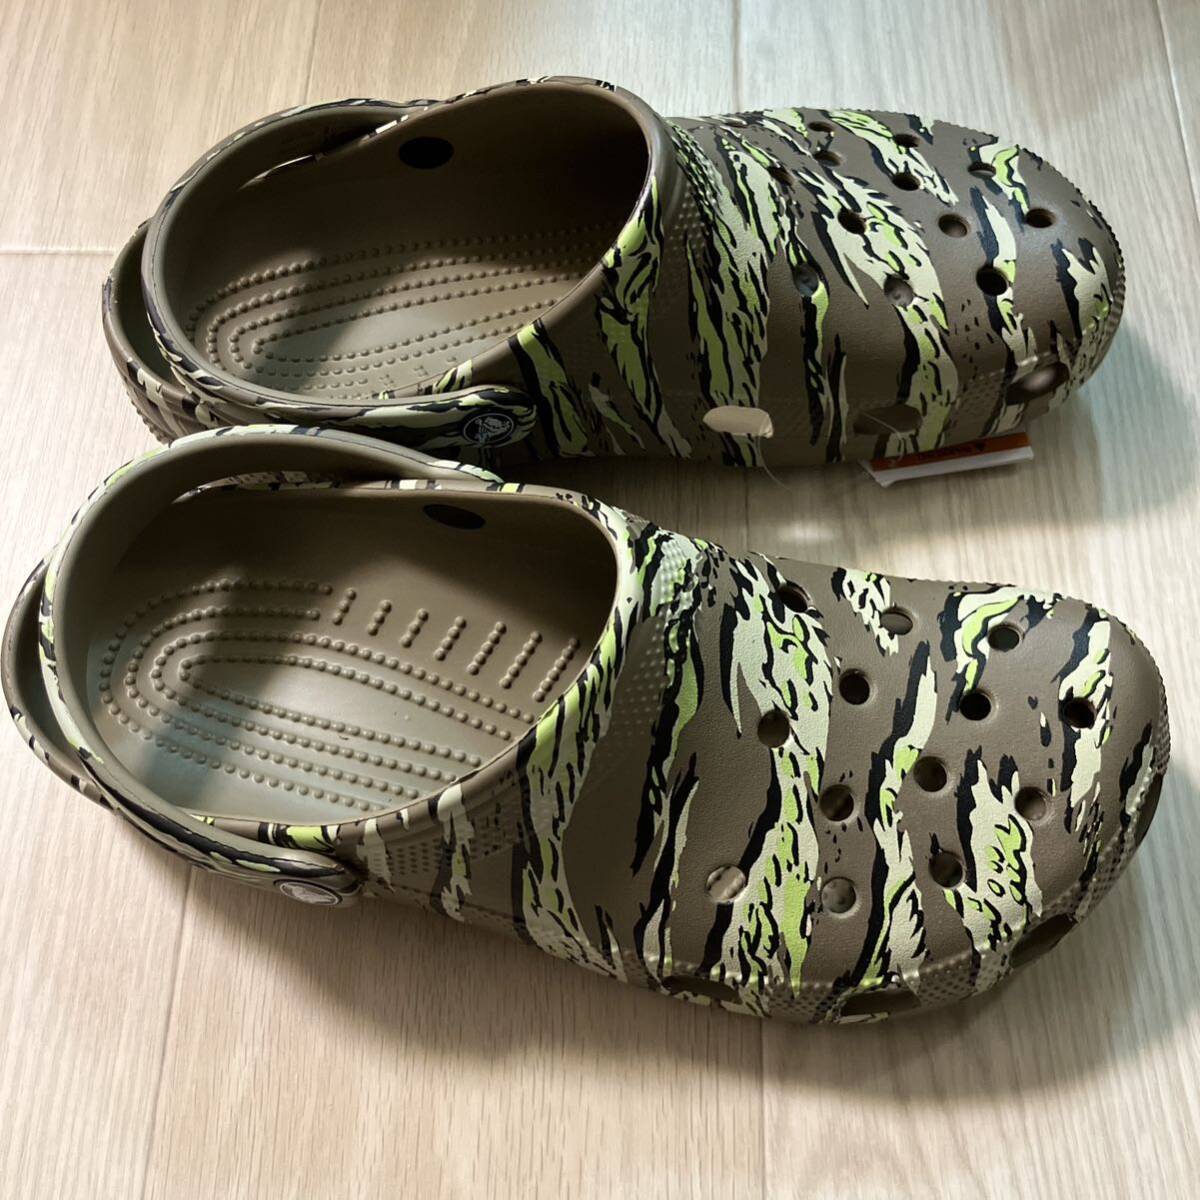  new goods 28. Crocs Classic printed duck clog free shipping 